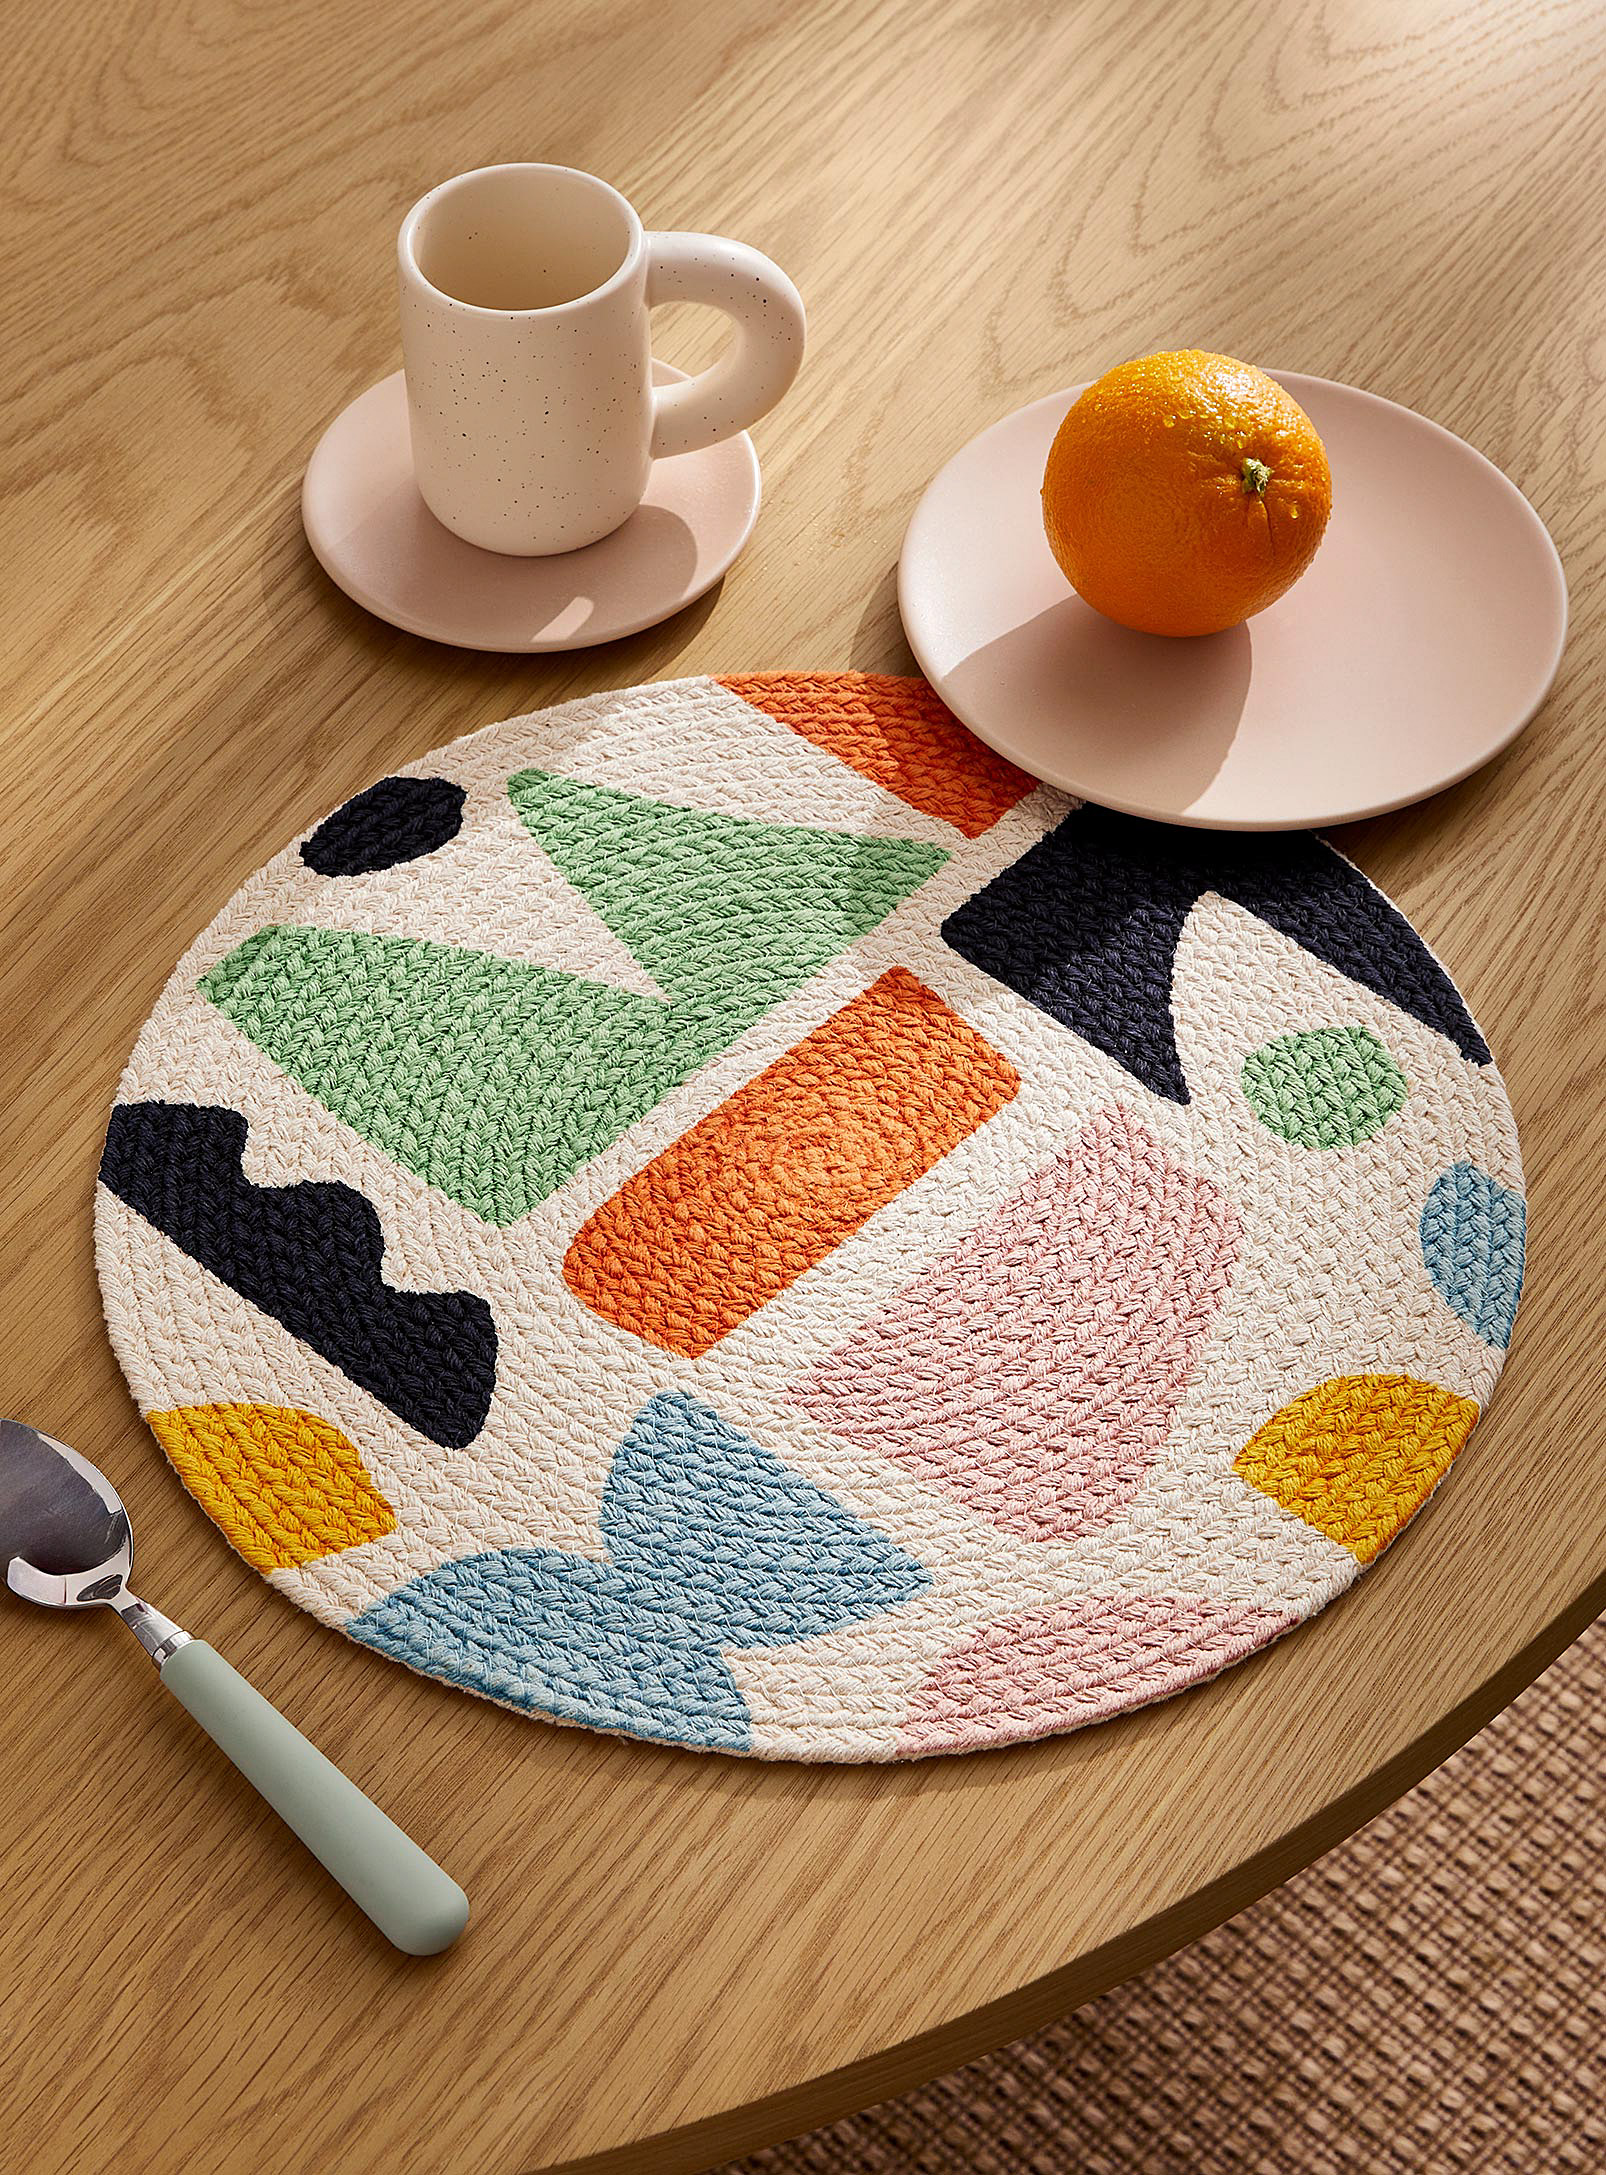 Danica Colourful Shapes Braided Placemat In Patterned Ecru